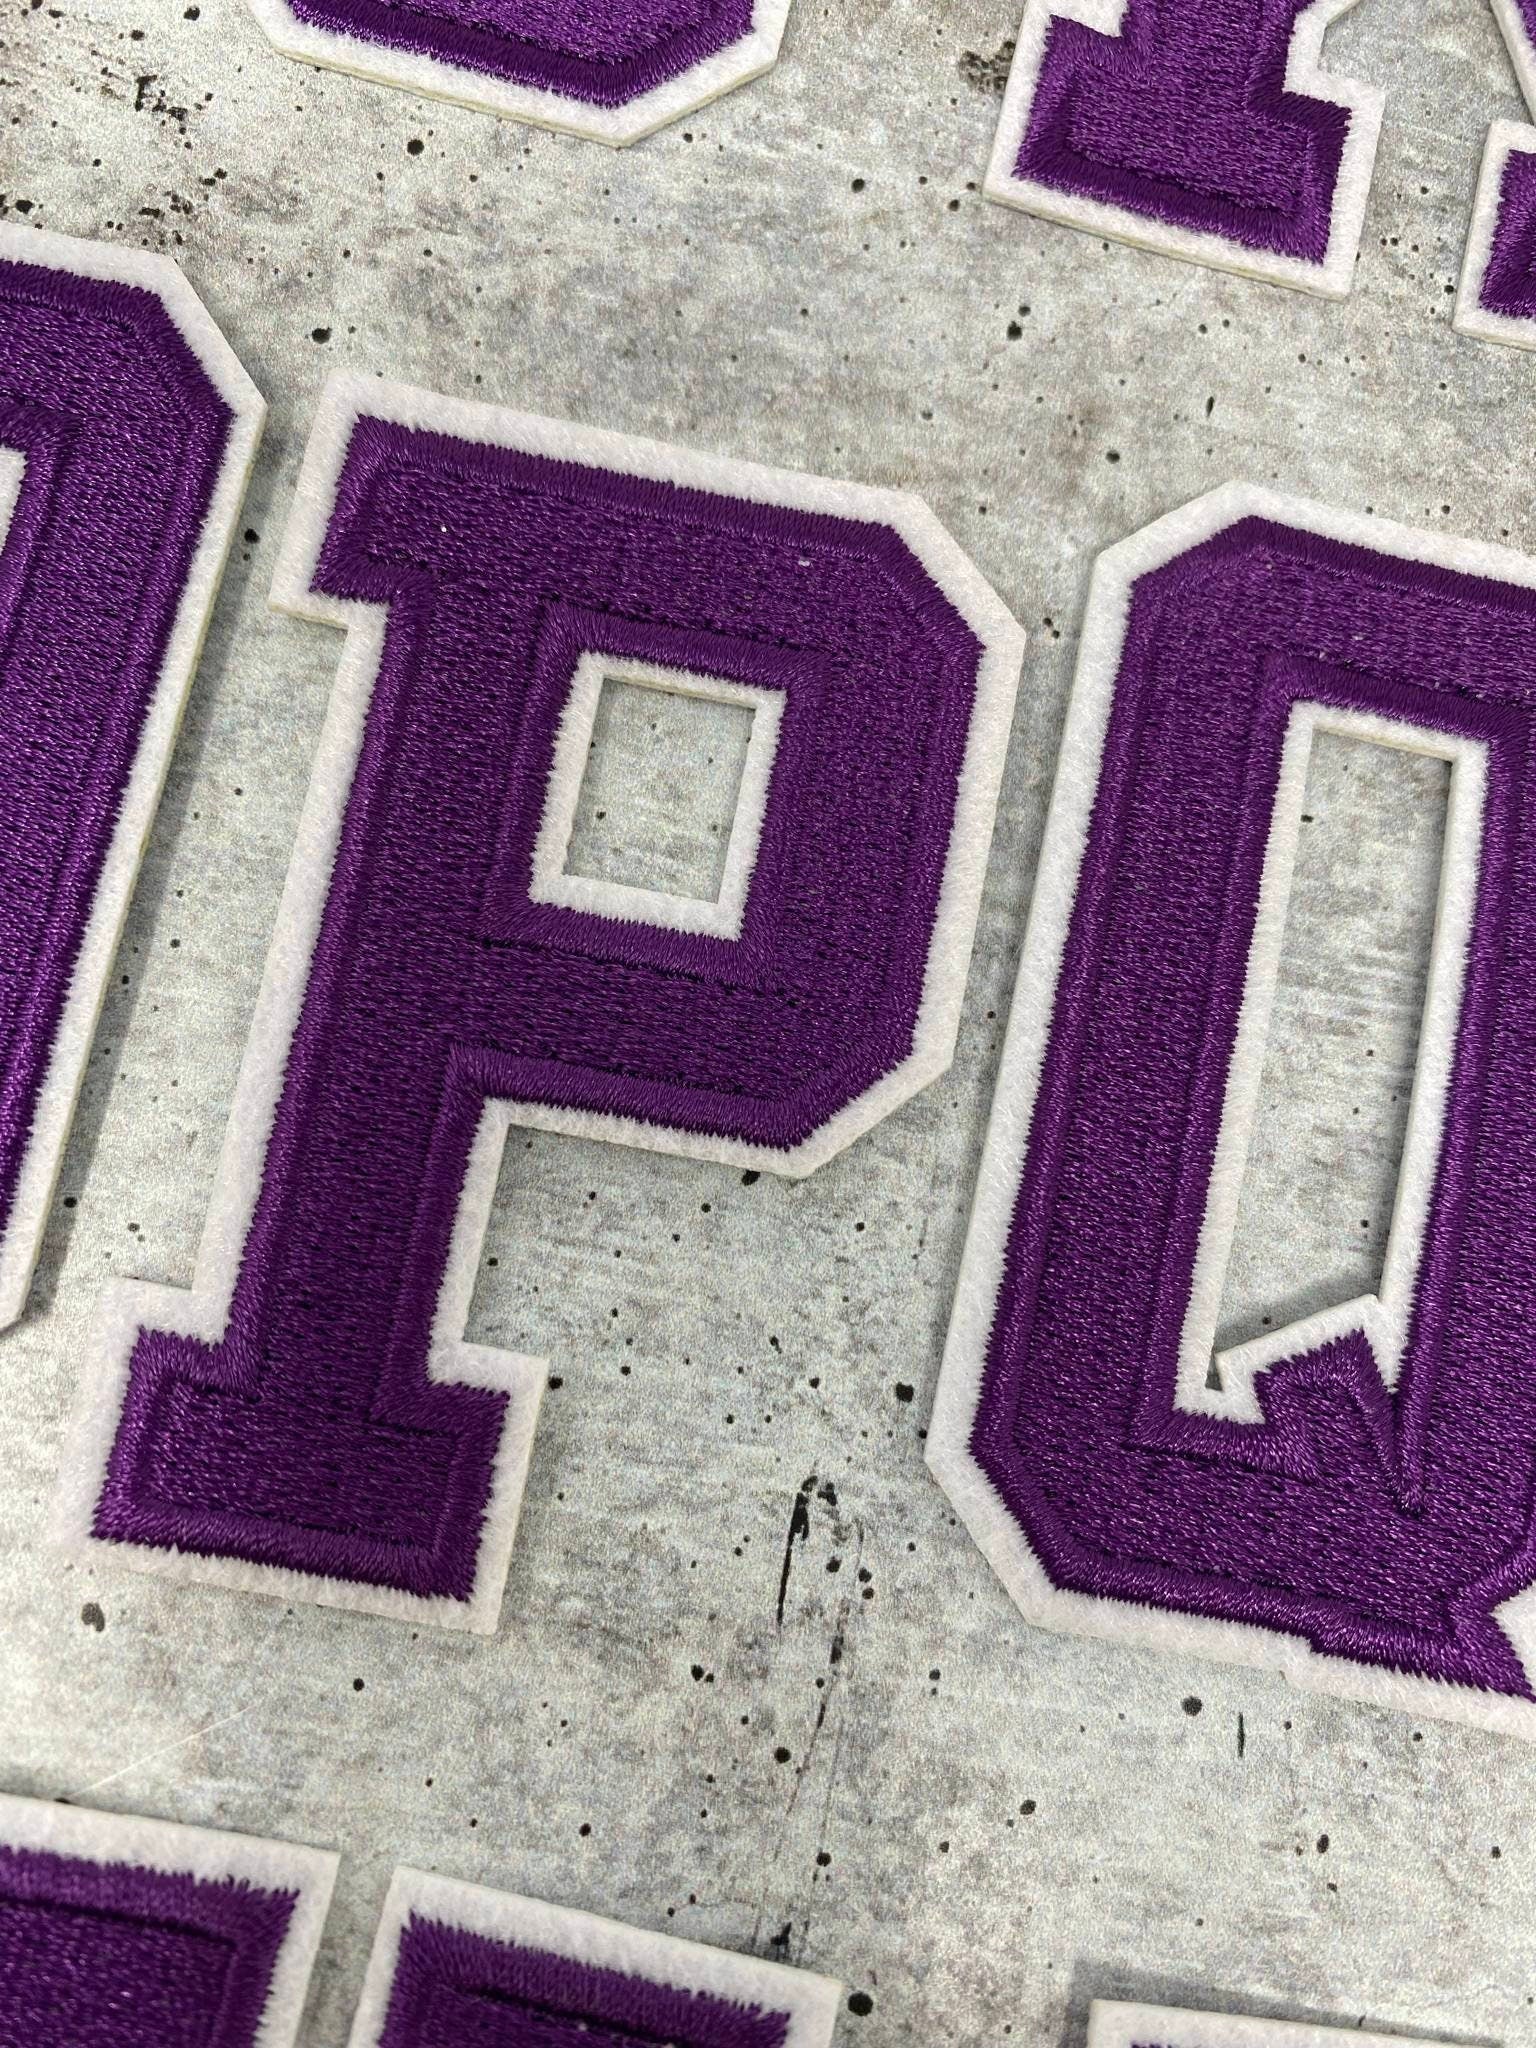 New, "PURPLE", 3" Embroidered Letter w/White Felt, Varsity Letter Patch, 1-pc, Iron-on Backing, Choose Your Letter, A-Z Letters, DIY Letters